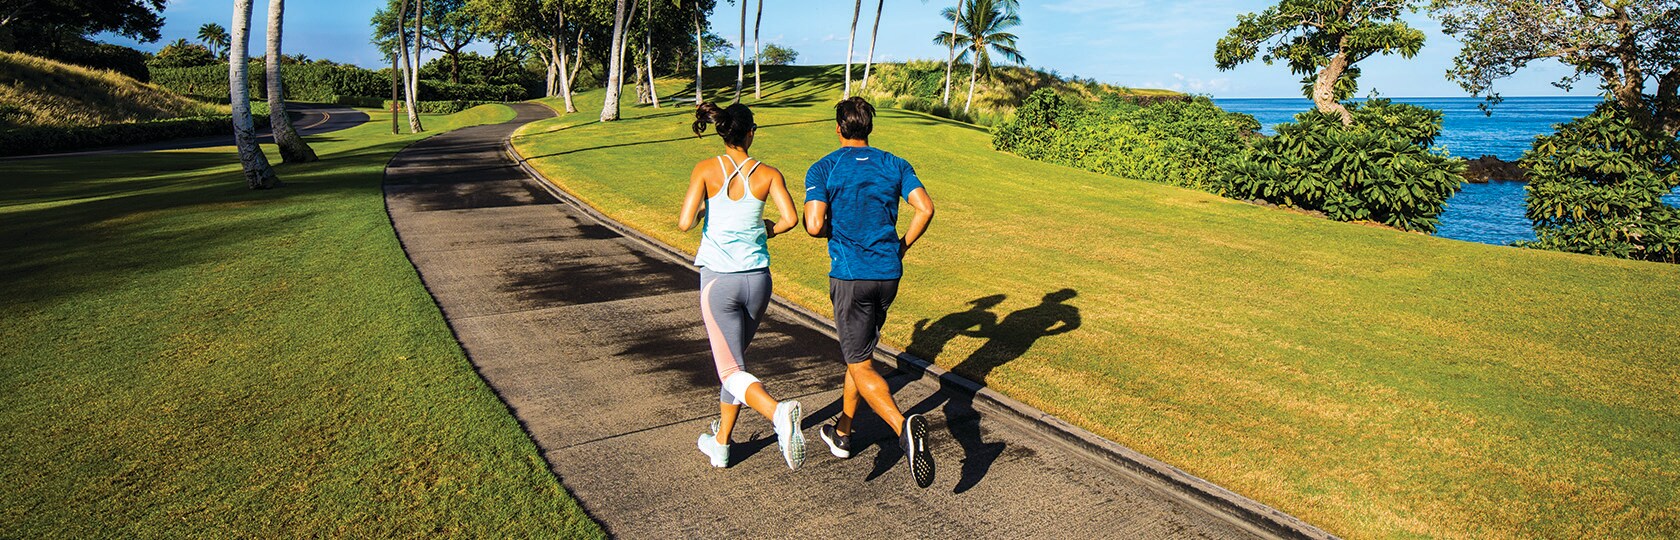 man and woman running on sidewalk by green grass with ocean and palm trees in background